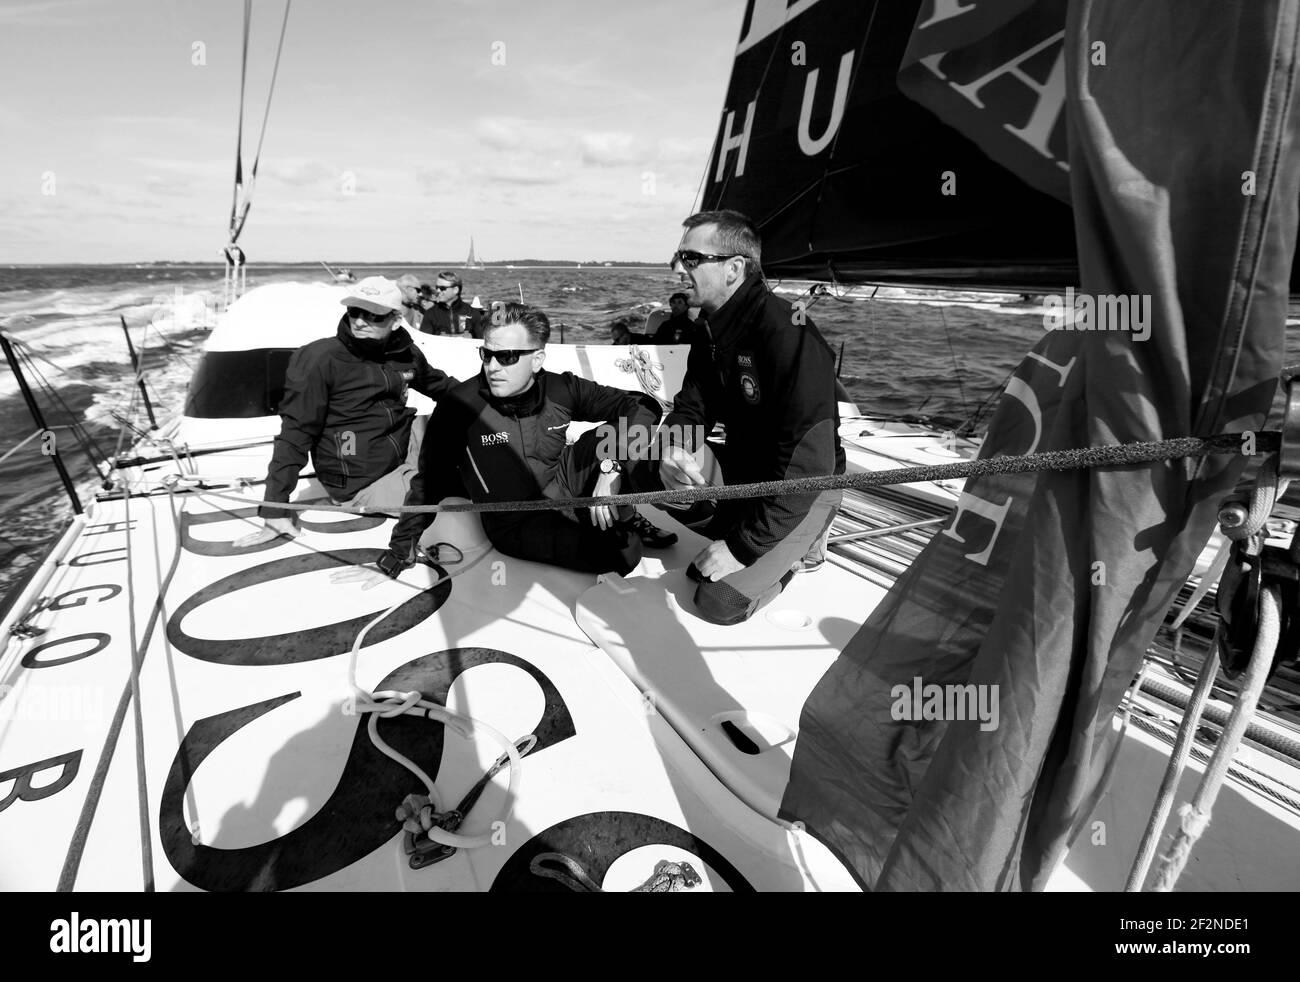 SAILING - ARTEMIS CHALLENGE - AROUND THE ISLE OF WIGHT - GREAT BRITAIN - 10/08/2011 - PHOTO : CHRISTOPHE LAUNAY / DPPI - Onboard Hugo Boss - Skipper Alex Thomson & Crew along with celebrity Ewan McGregor (Actor) Stock Photo